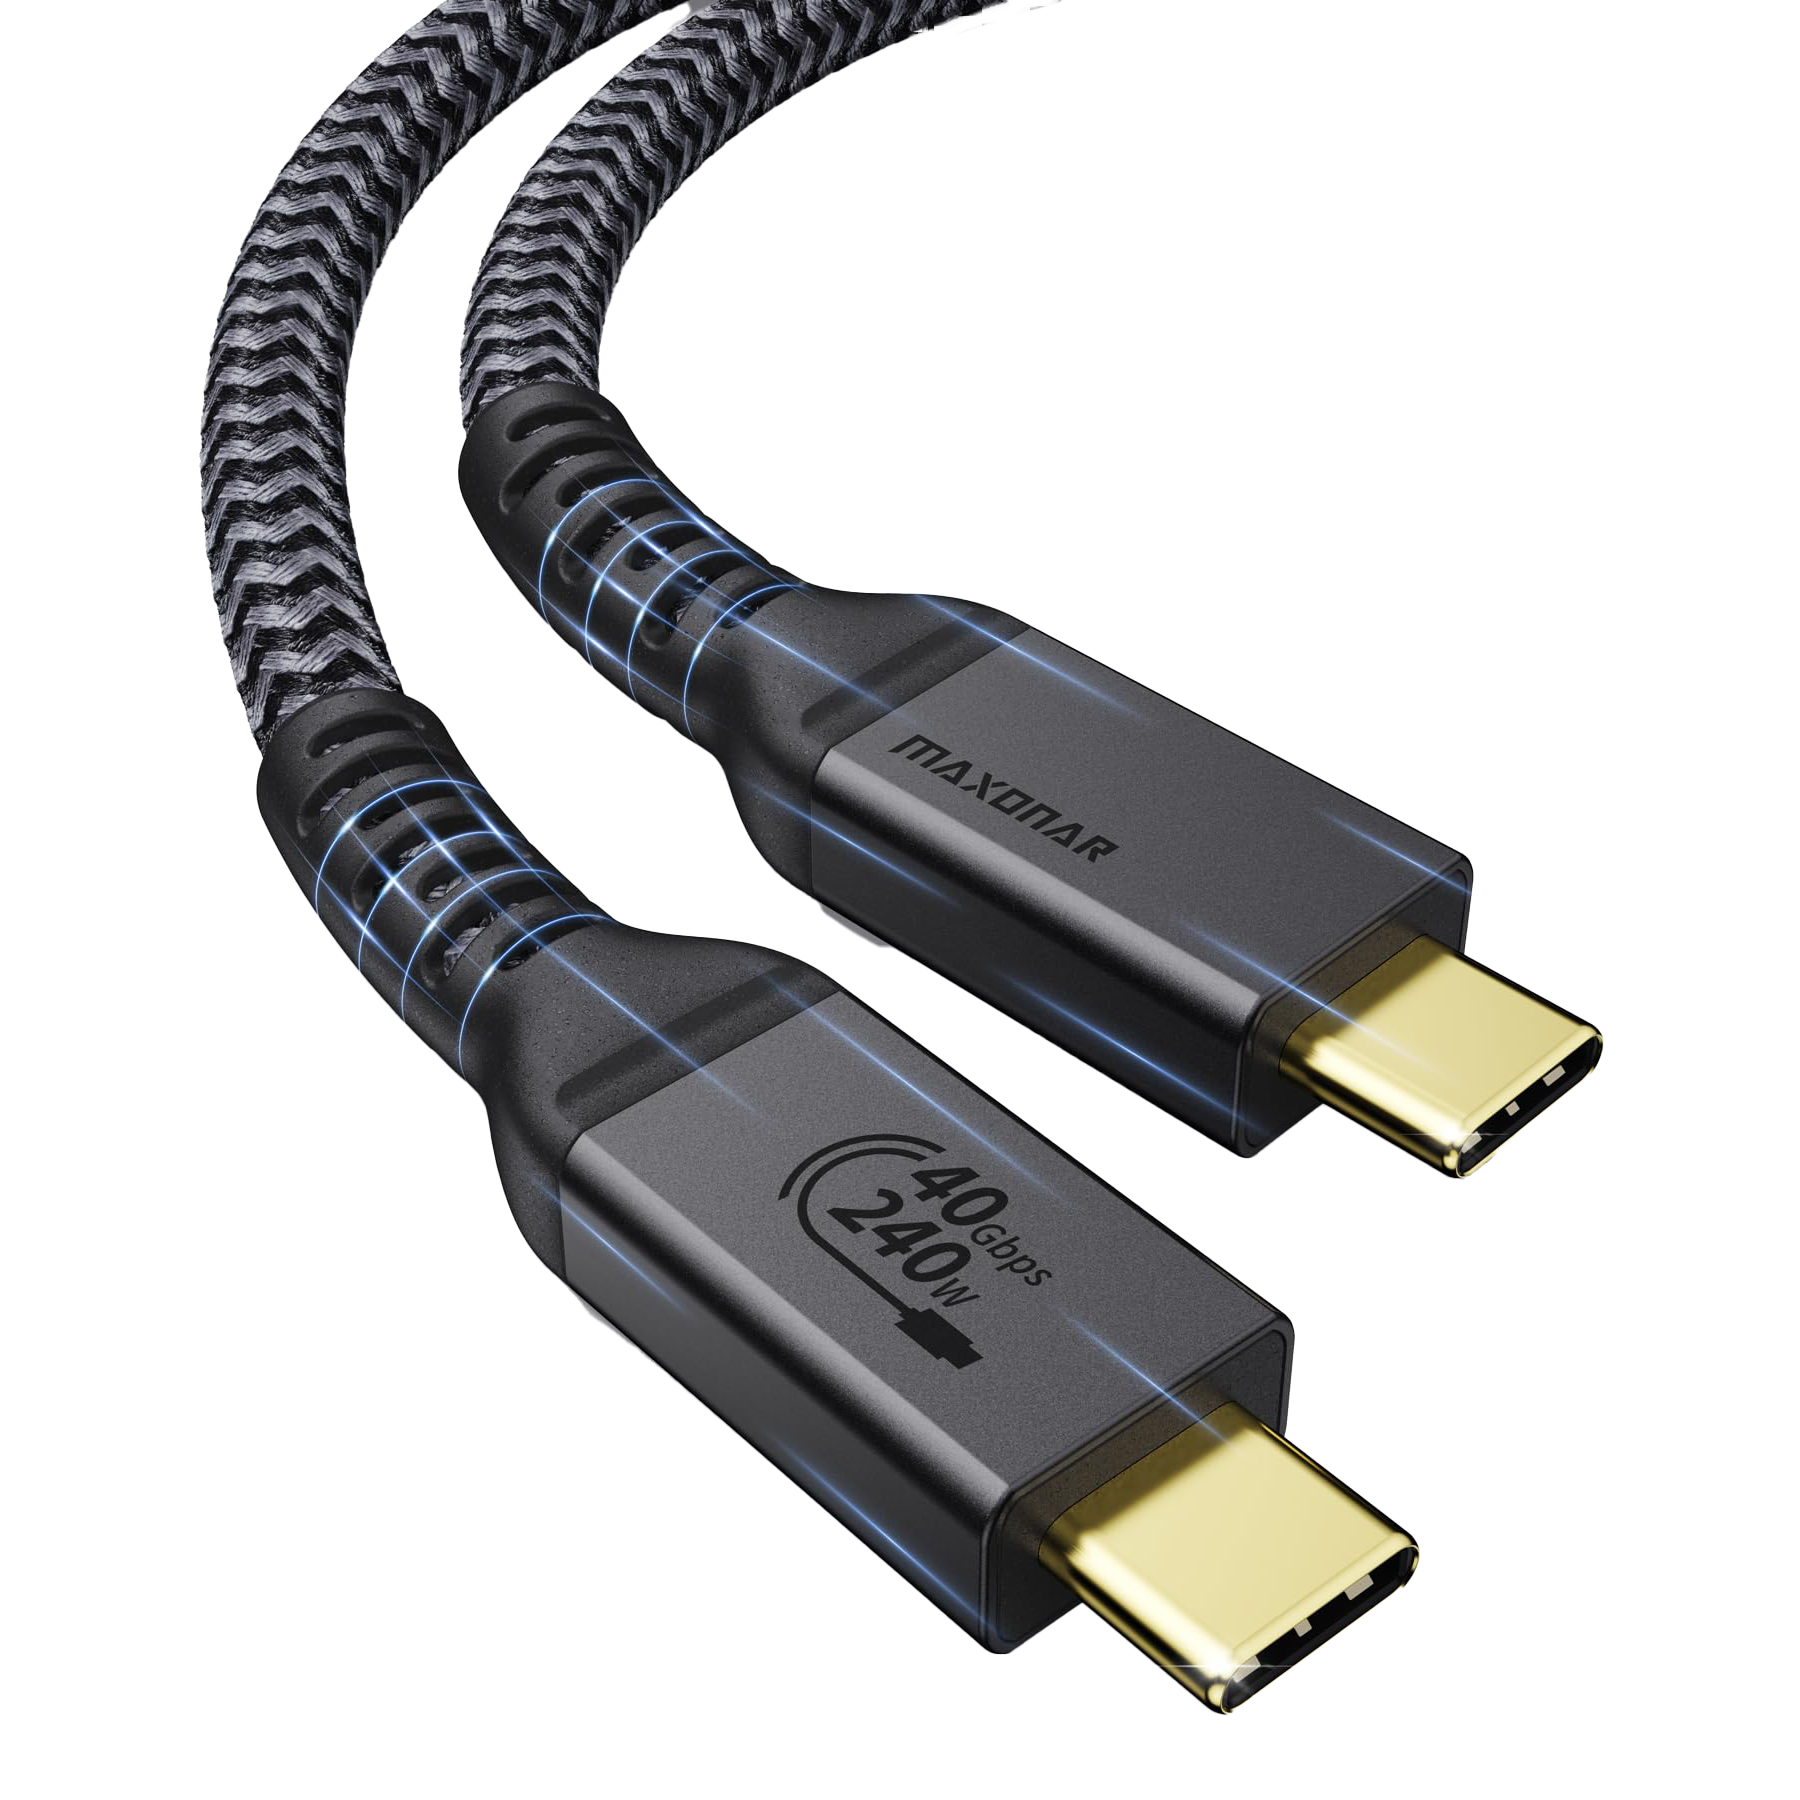  Cable Matters [USB-IF Certified] 10 Gbps Gen 2 USB C